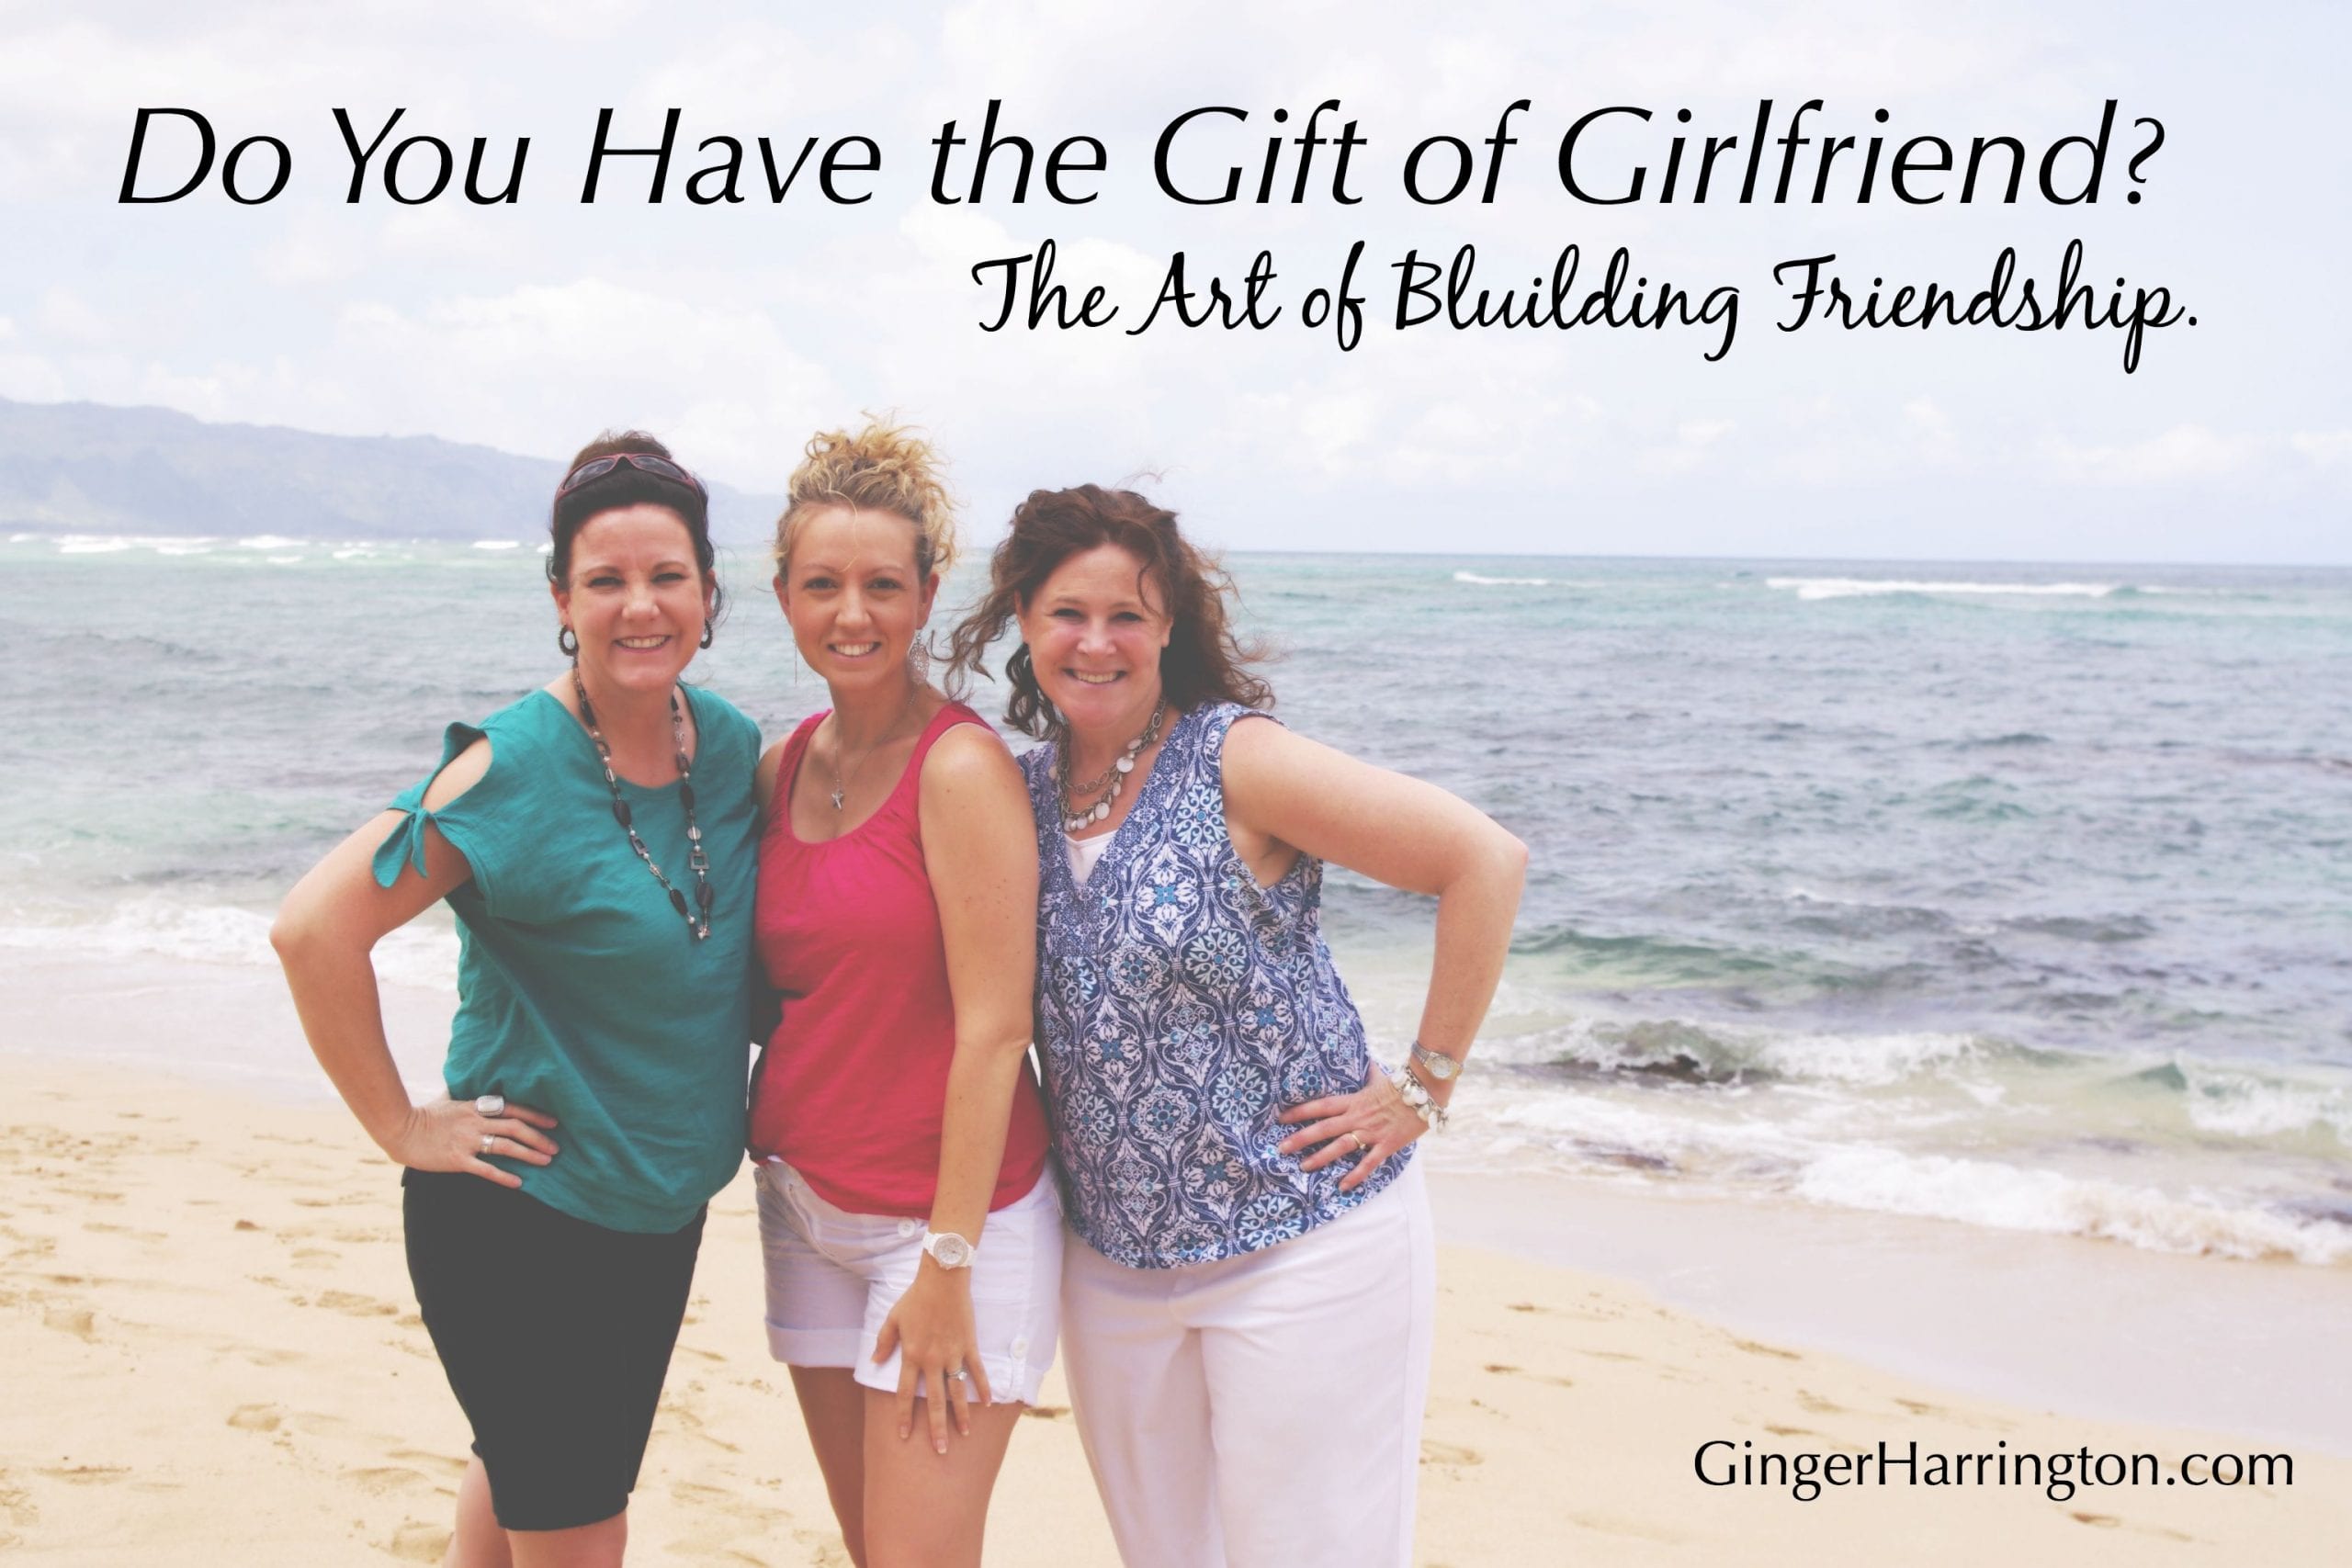 Do You Have the Gift of Girlfriend?